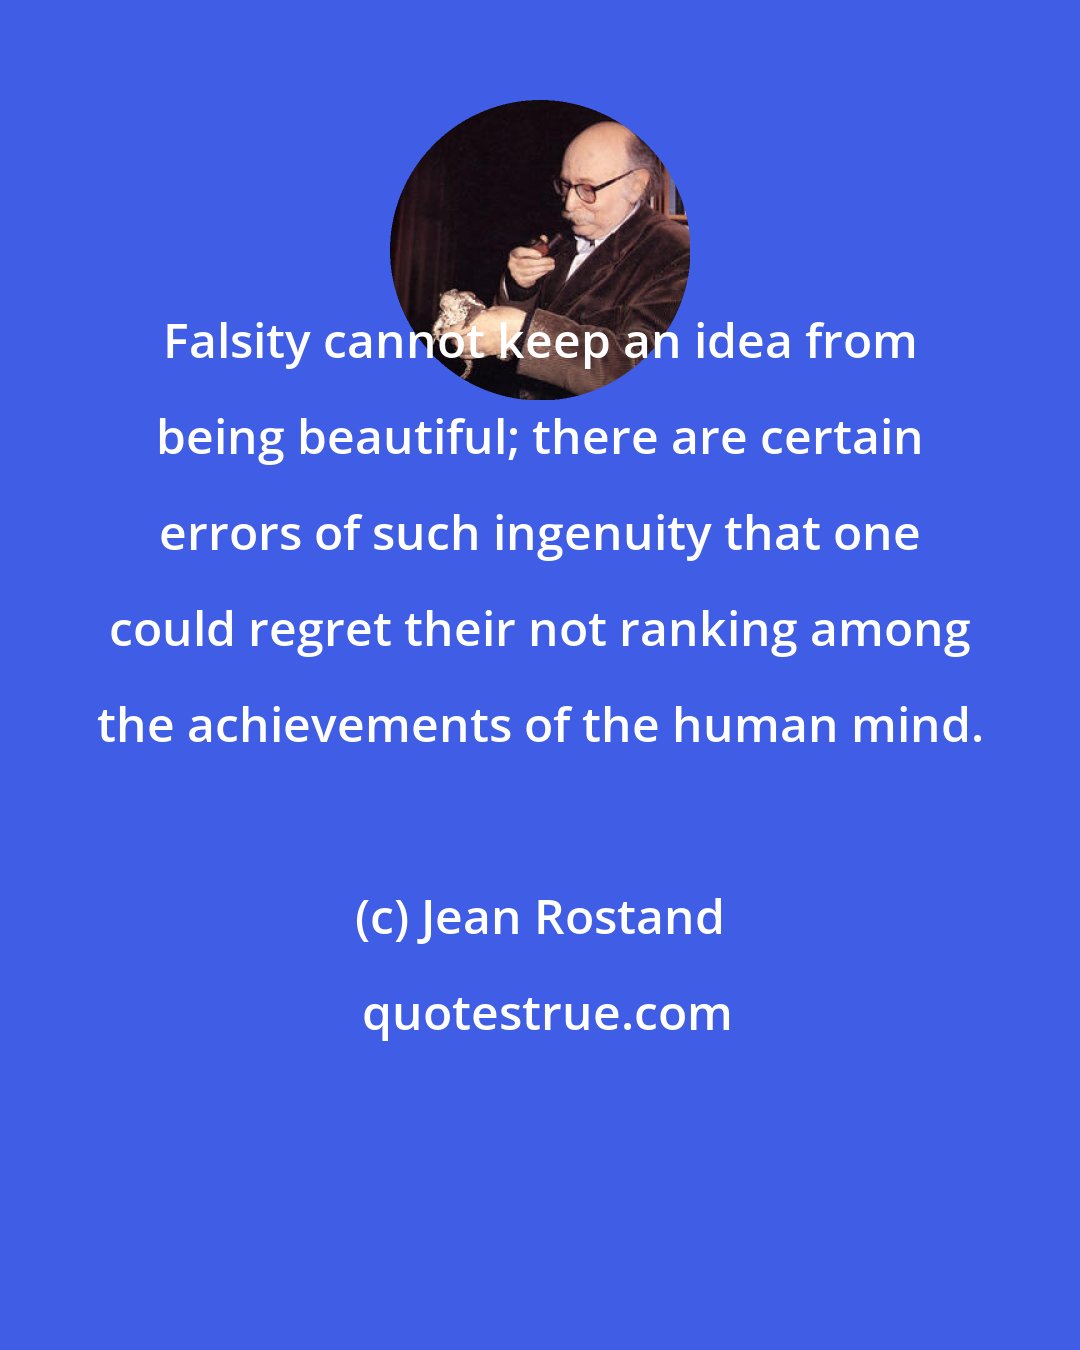 Jean Rostand: Falsity cannot keep an idea from being beautiful; there are certain errors of such ingenuity that one could regret their not ranking among the achievements of the human mind.